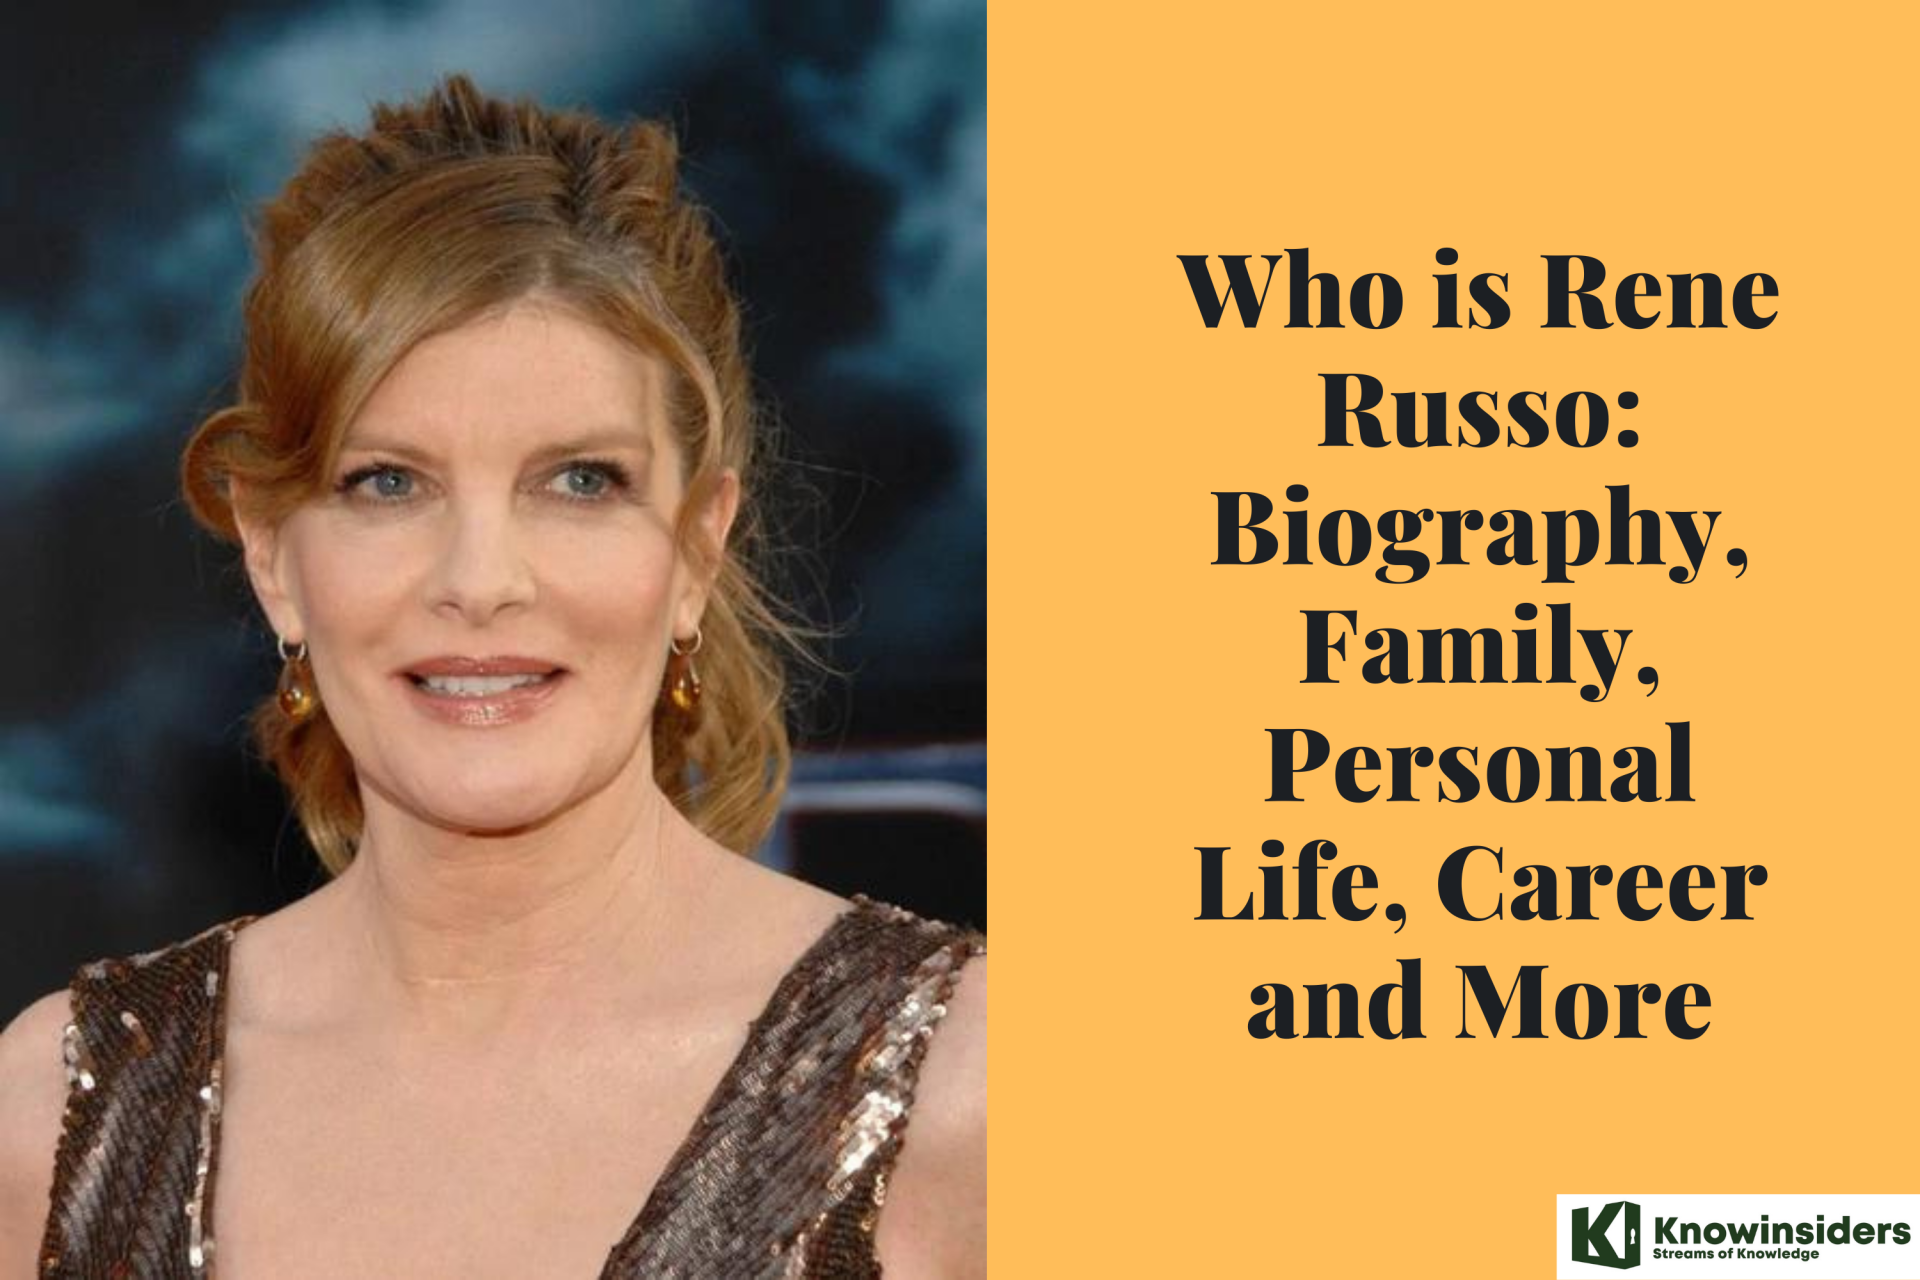 Who is Rene Russo: Biography, Family, Personal Life, Career and More